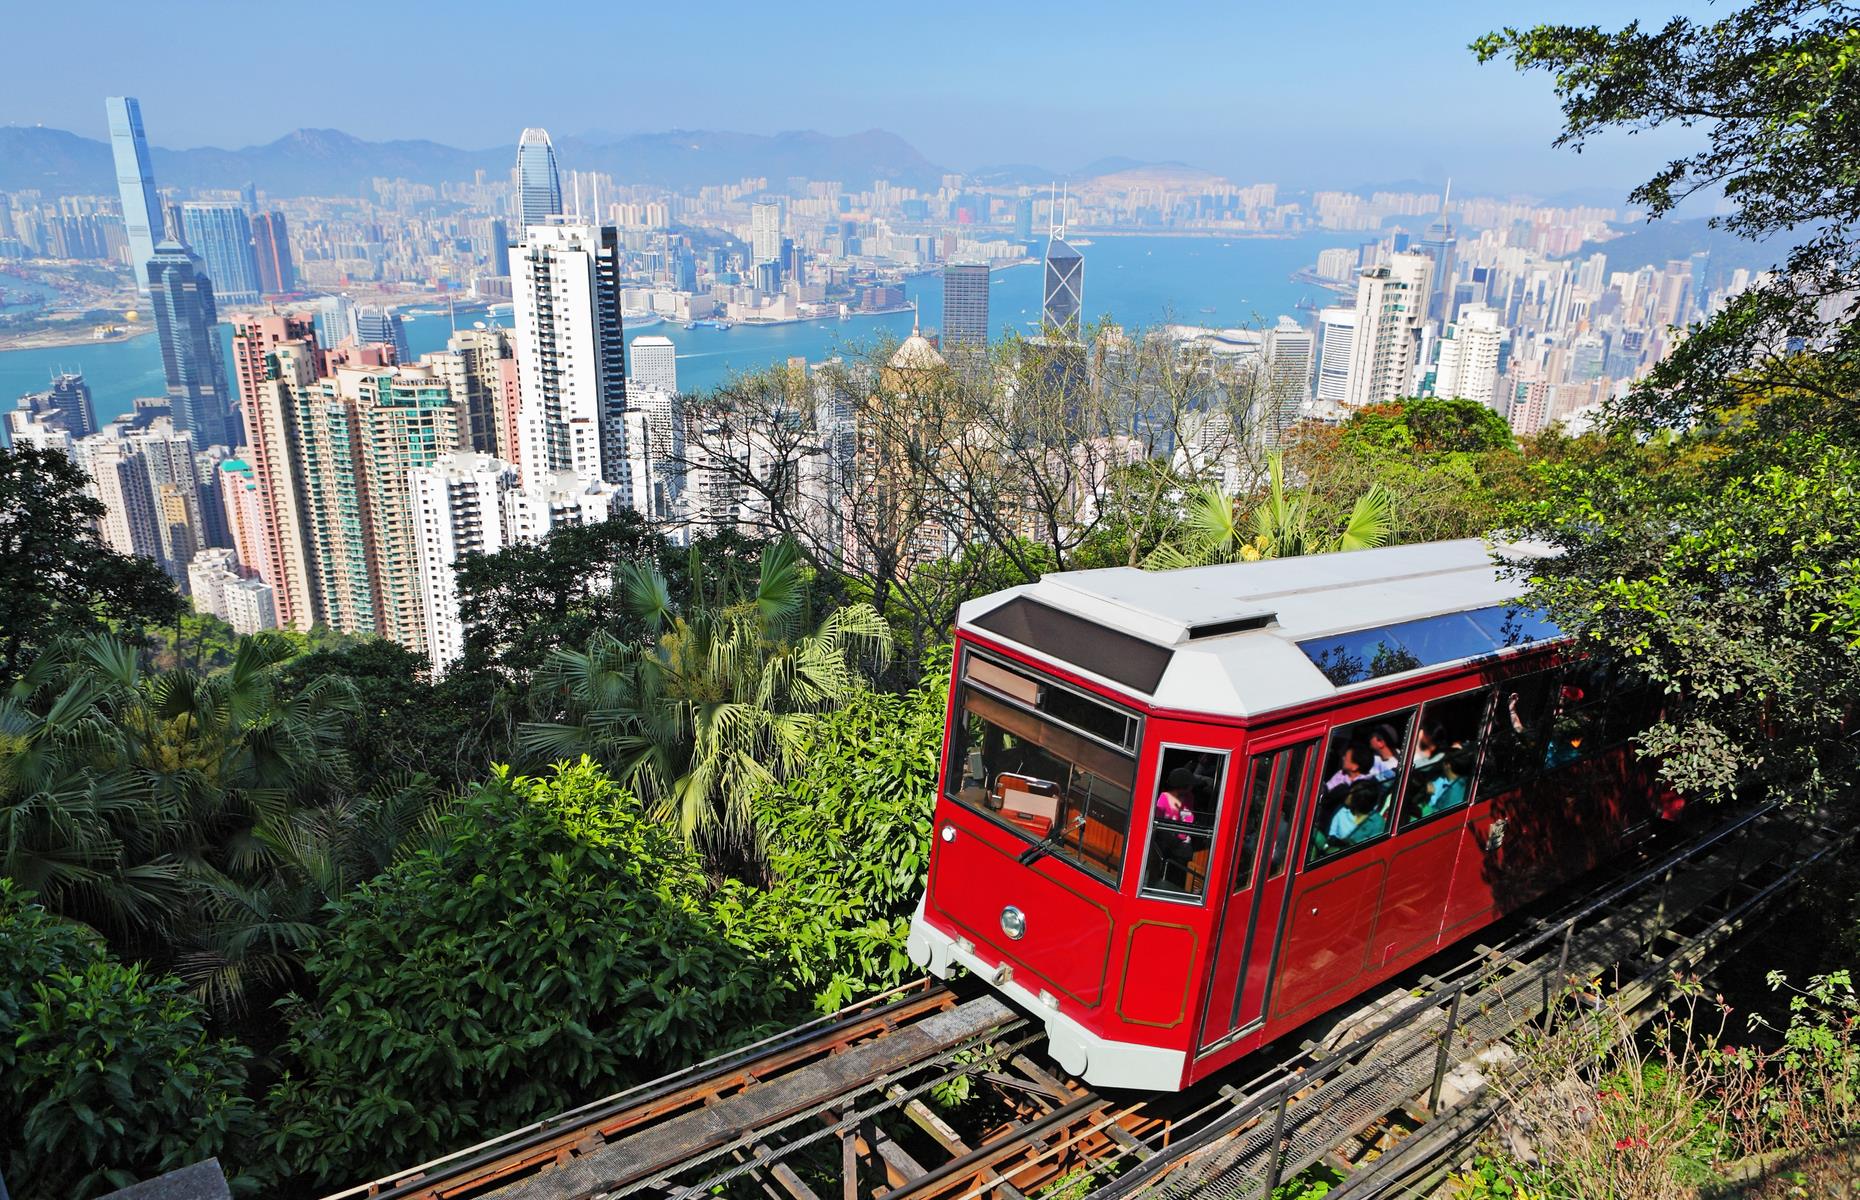 The Peak is one of Hong Kong’s most popular tourist spots, offering a double whammy of urban panoramas and invigorating walks through lush forest.